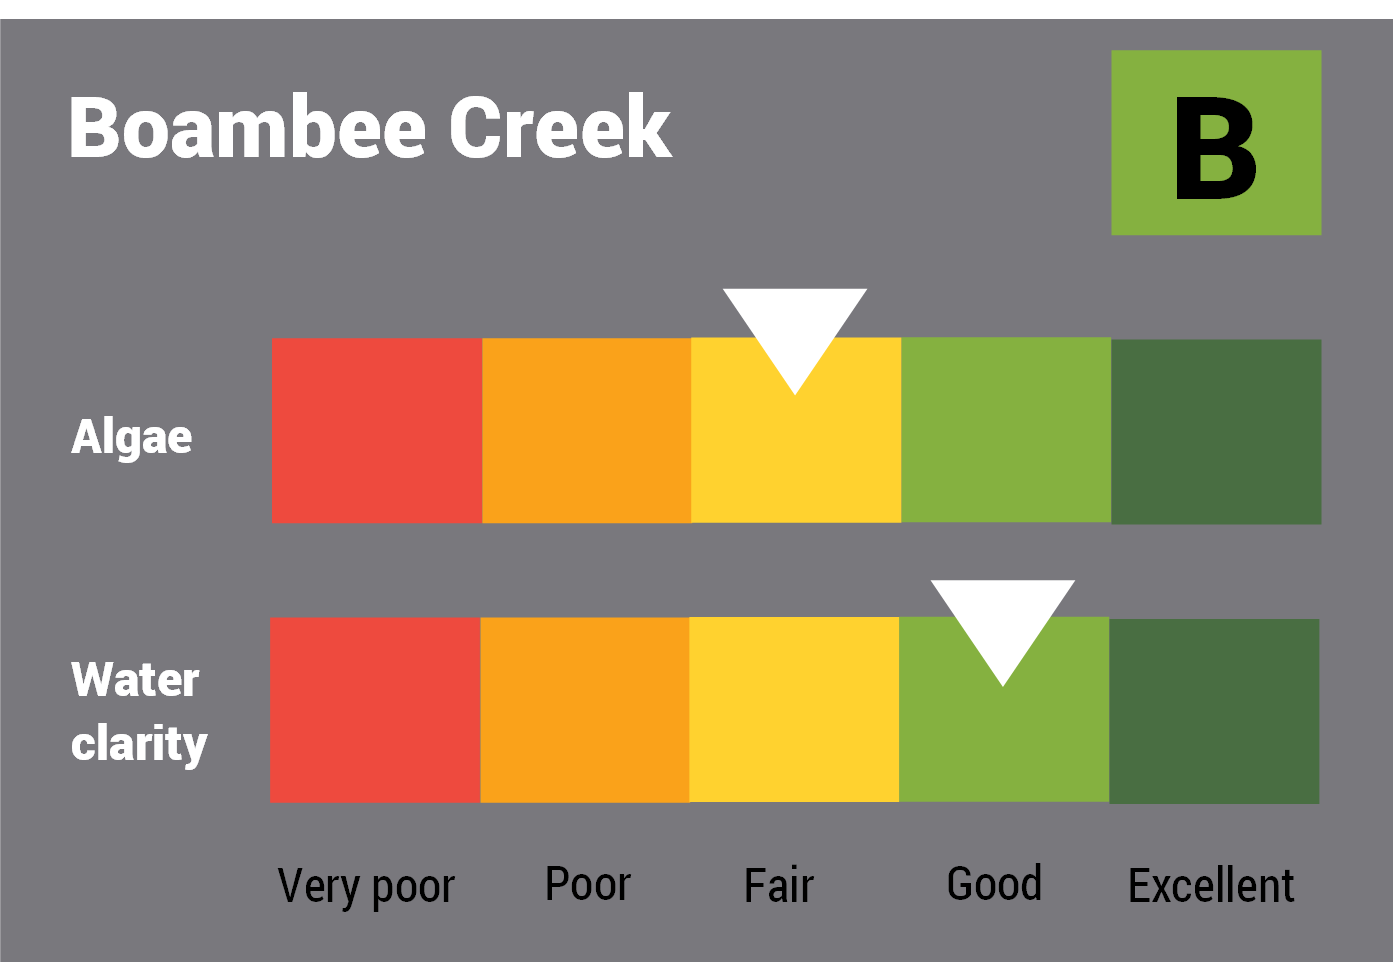 Boambee Creek water quality report card for algae and water clarity showing colour-coded ratings (red, orange, yellow, light green and dark green, which represent very poor, poor, fair, good and excellent, respectively). Algae is rated 'fair' and water clarity is rated 'good' giving an overall rating of 'fair' or 'C'.